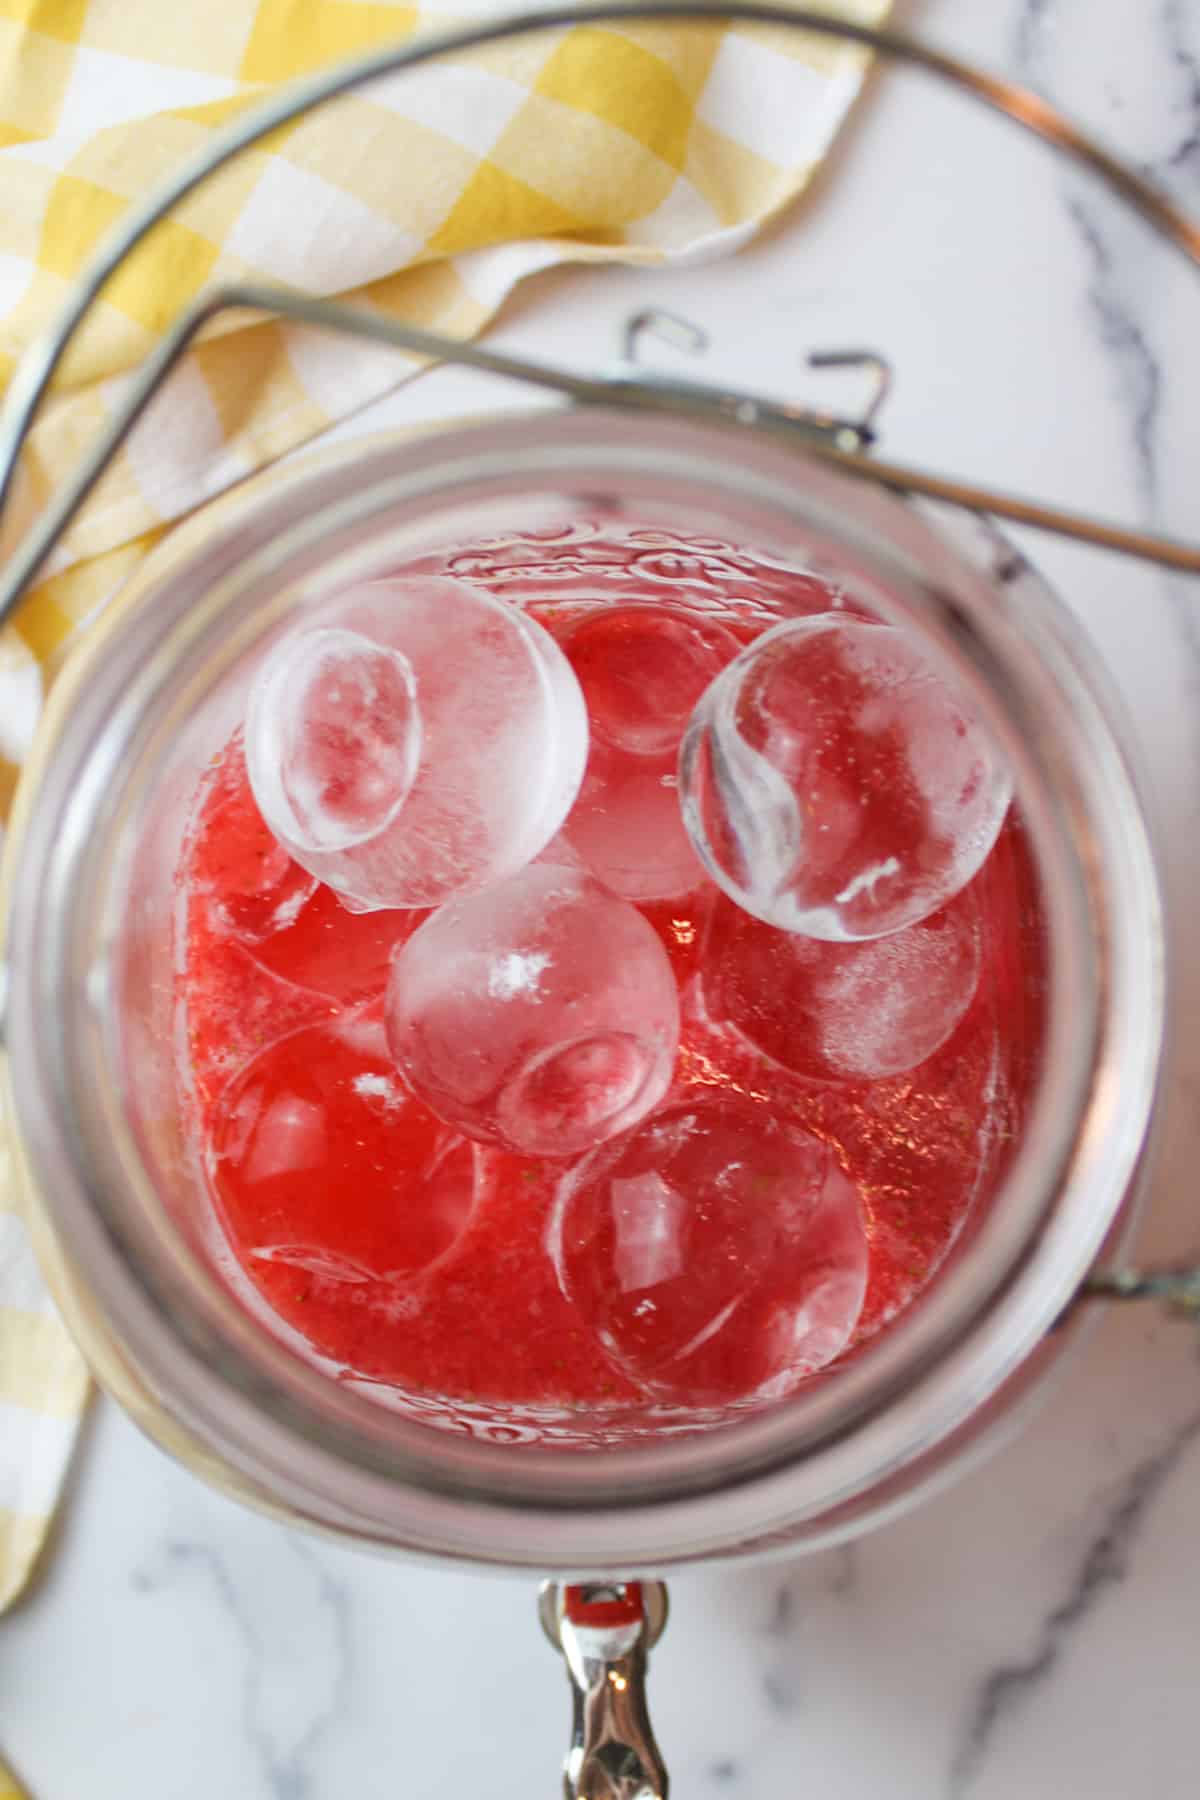 ice balls in a glass pitcher with strawberry puree and lemon juice.